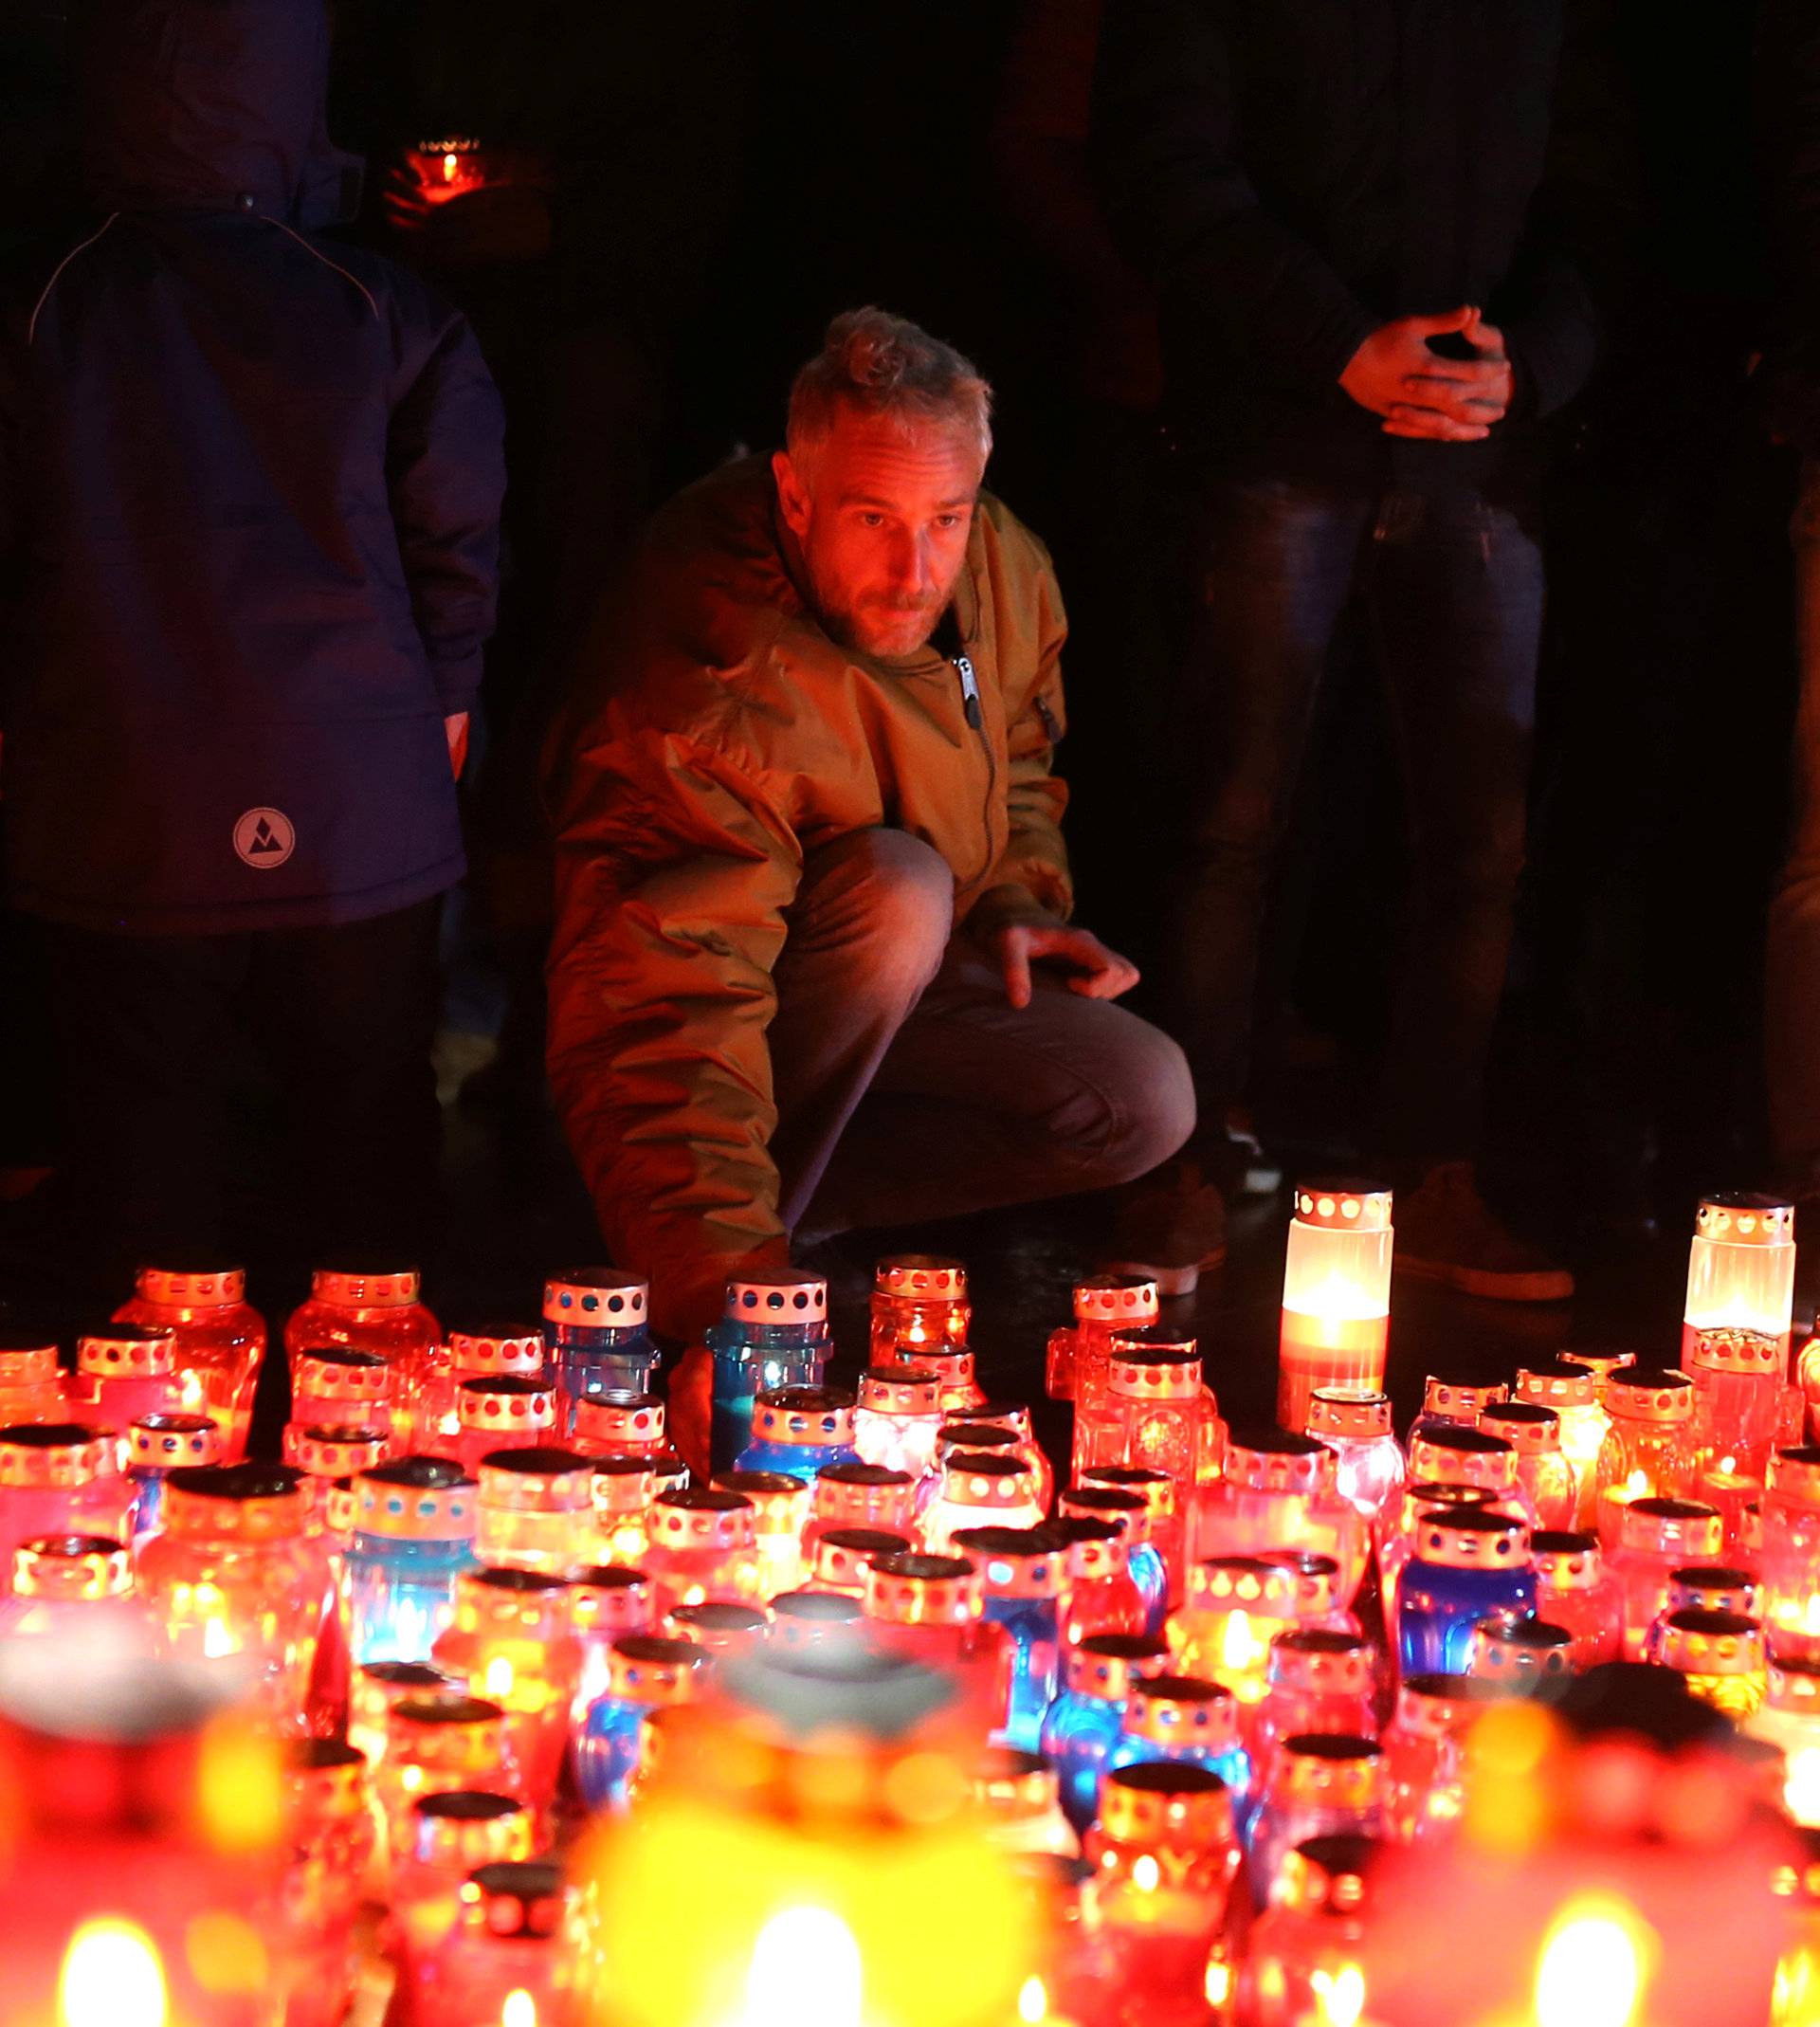 Bosnian Croats pray and light candles for the convicted general Slobodan Praljak, who killed himself seconds after the verdict in the U.N. war crimes tribunal in The Hague, in Mostar